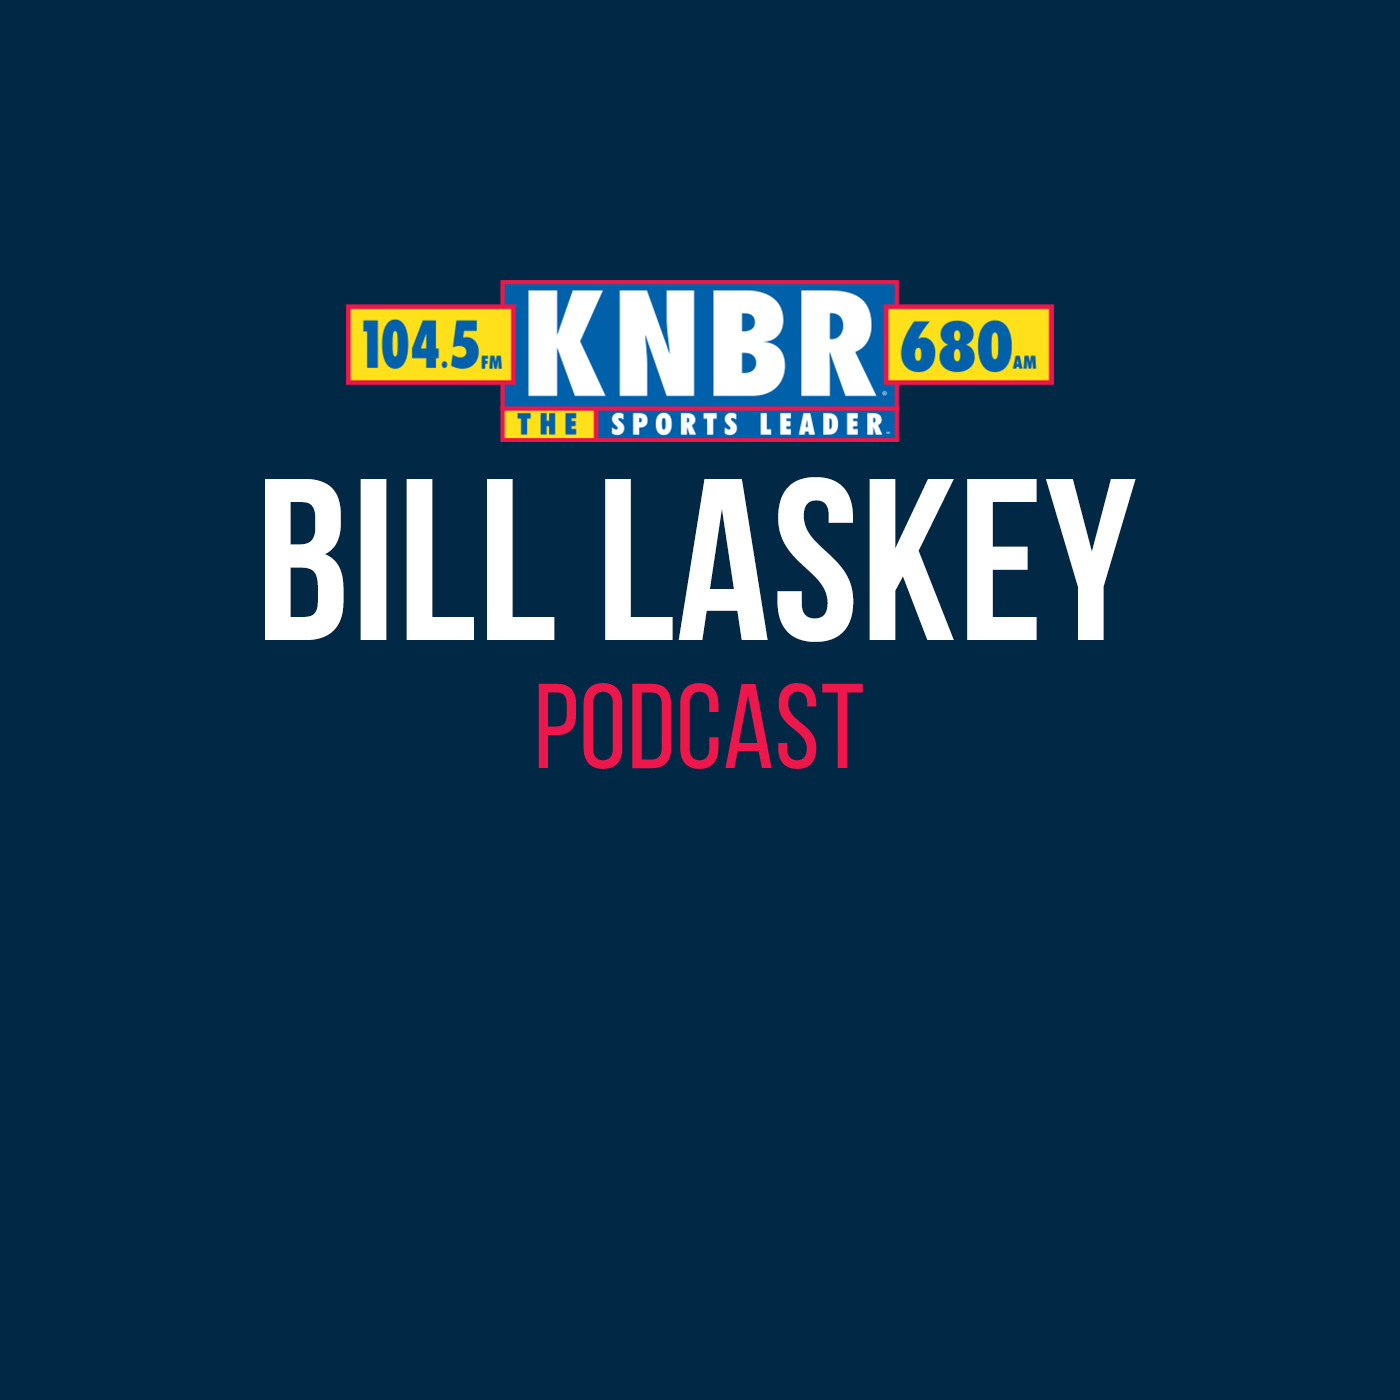 4-2 "Mystery Guest" Steve Sax Predicts The Outcome Of the 2022 MLB Season with Bill Laskey on Extra Innings